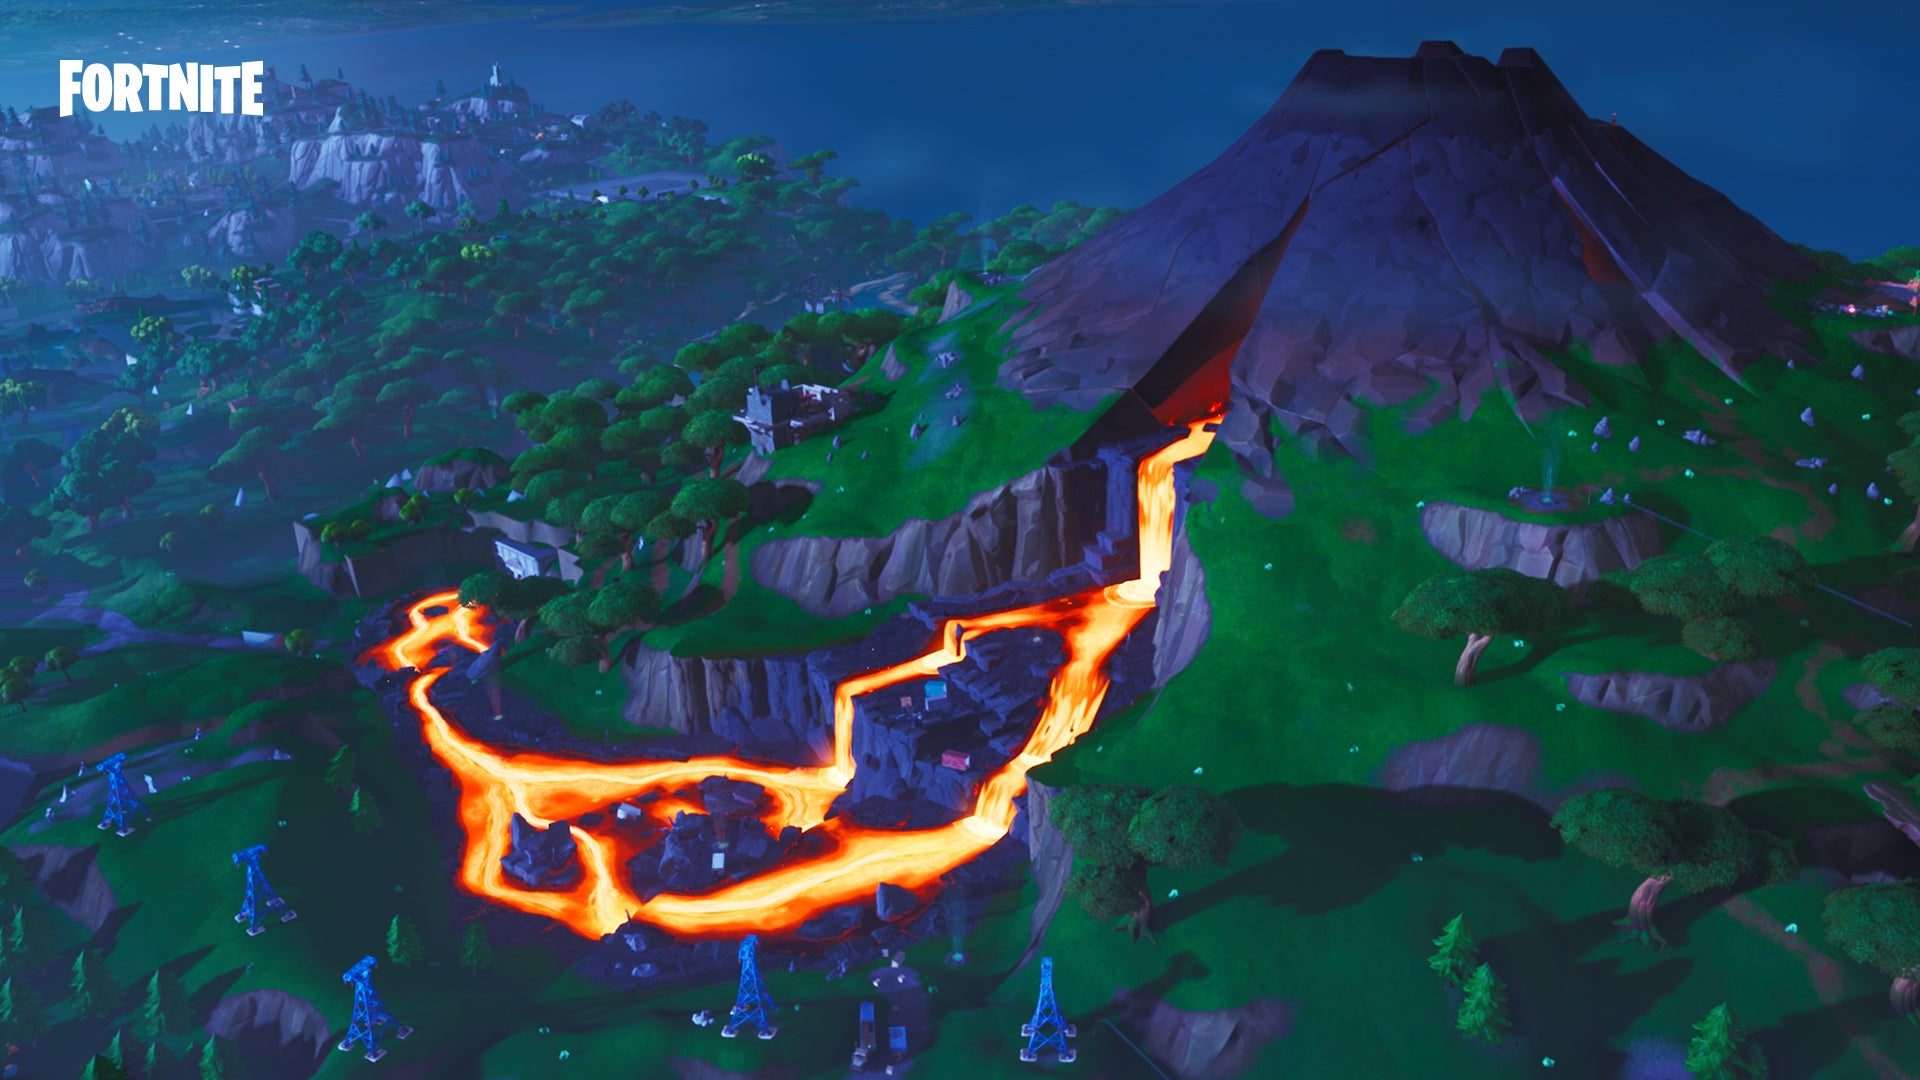 Image for Fortnite dataminers reveal which buildings will get destroyed by the impending volcano eruption